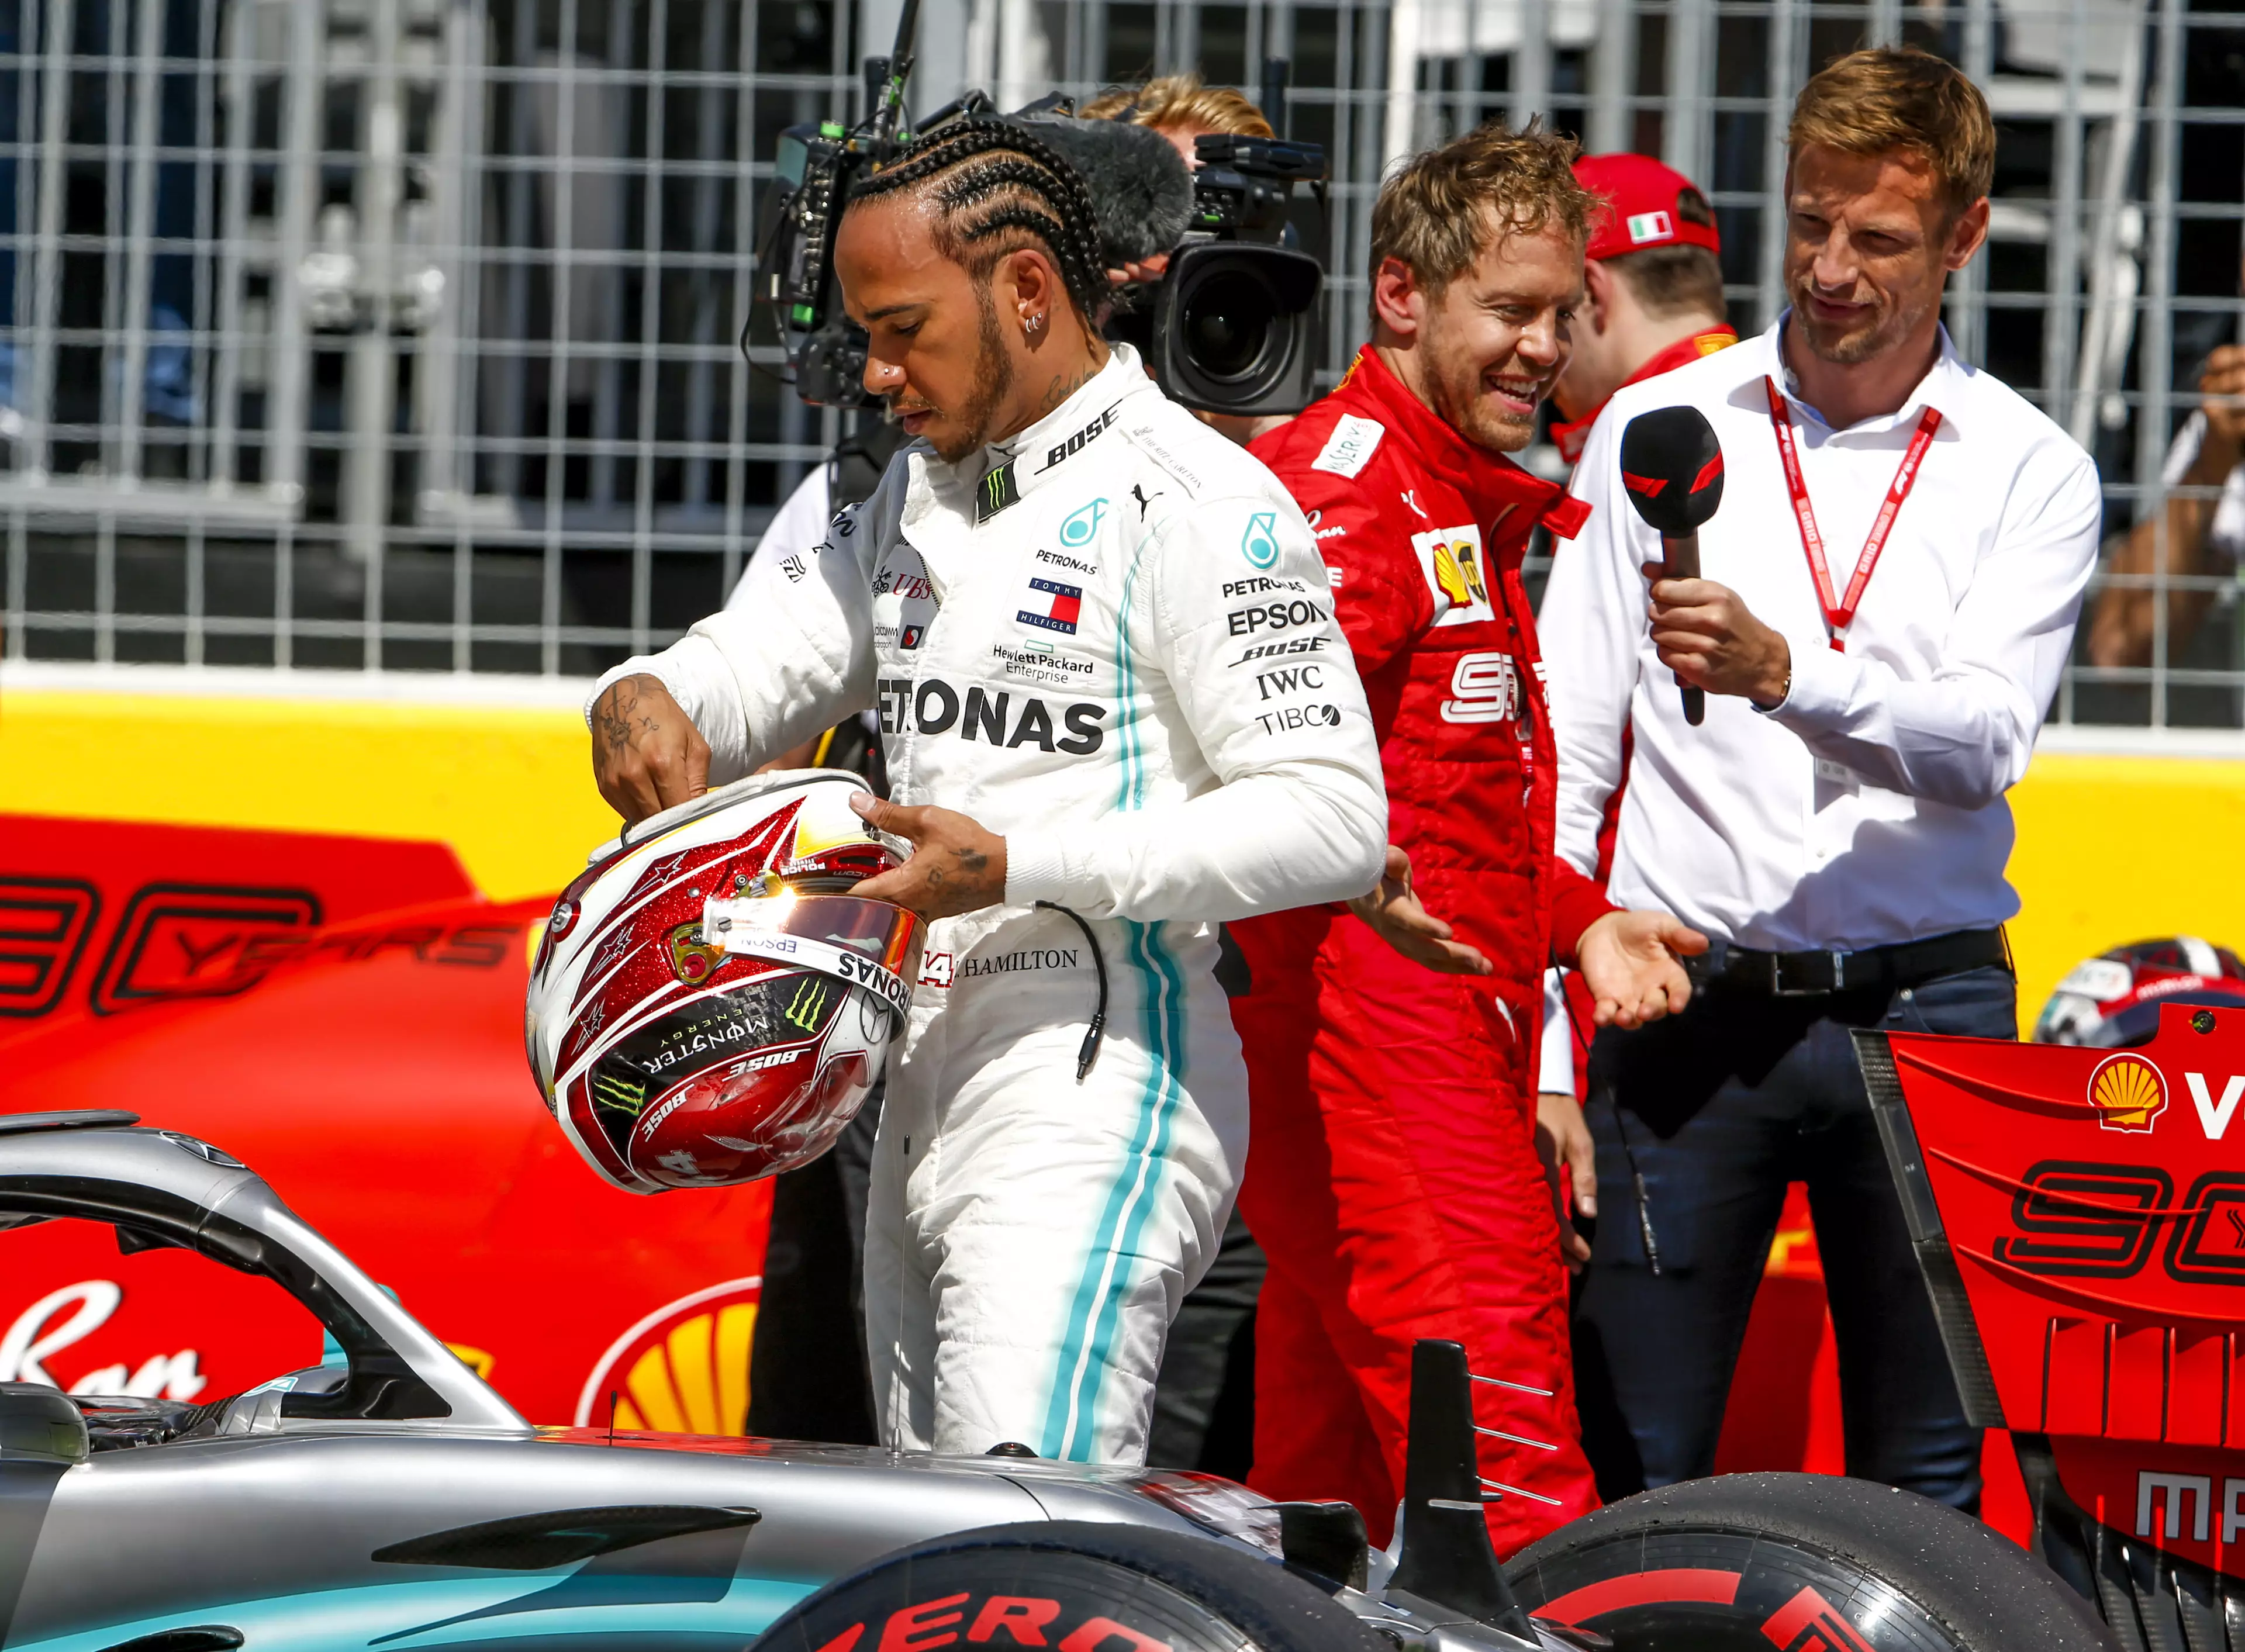 F1 Canadian GP: Live Stream, TV Channel And Starting Order On Grid